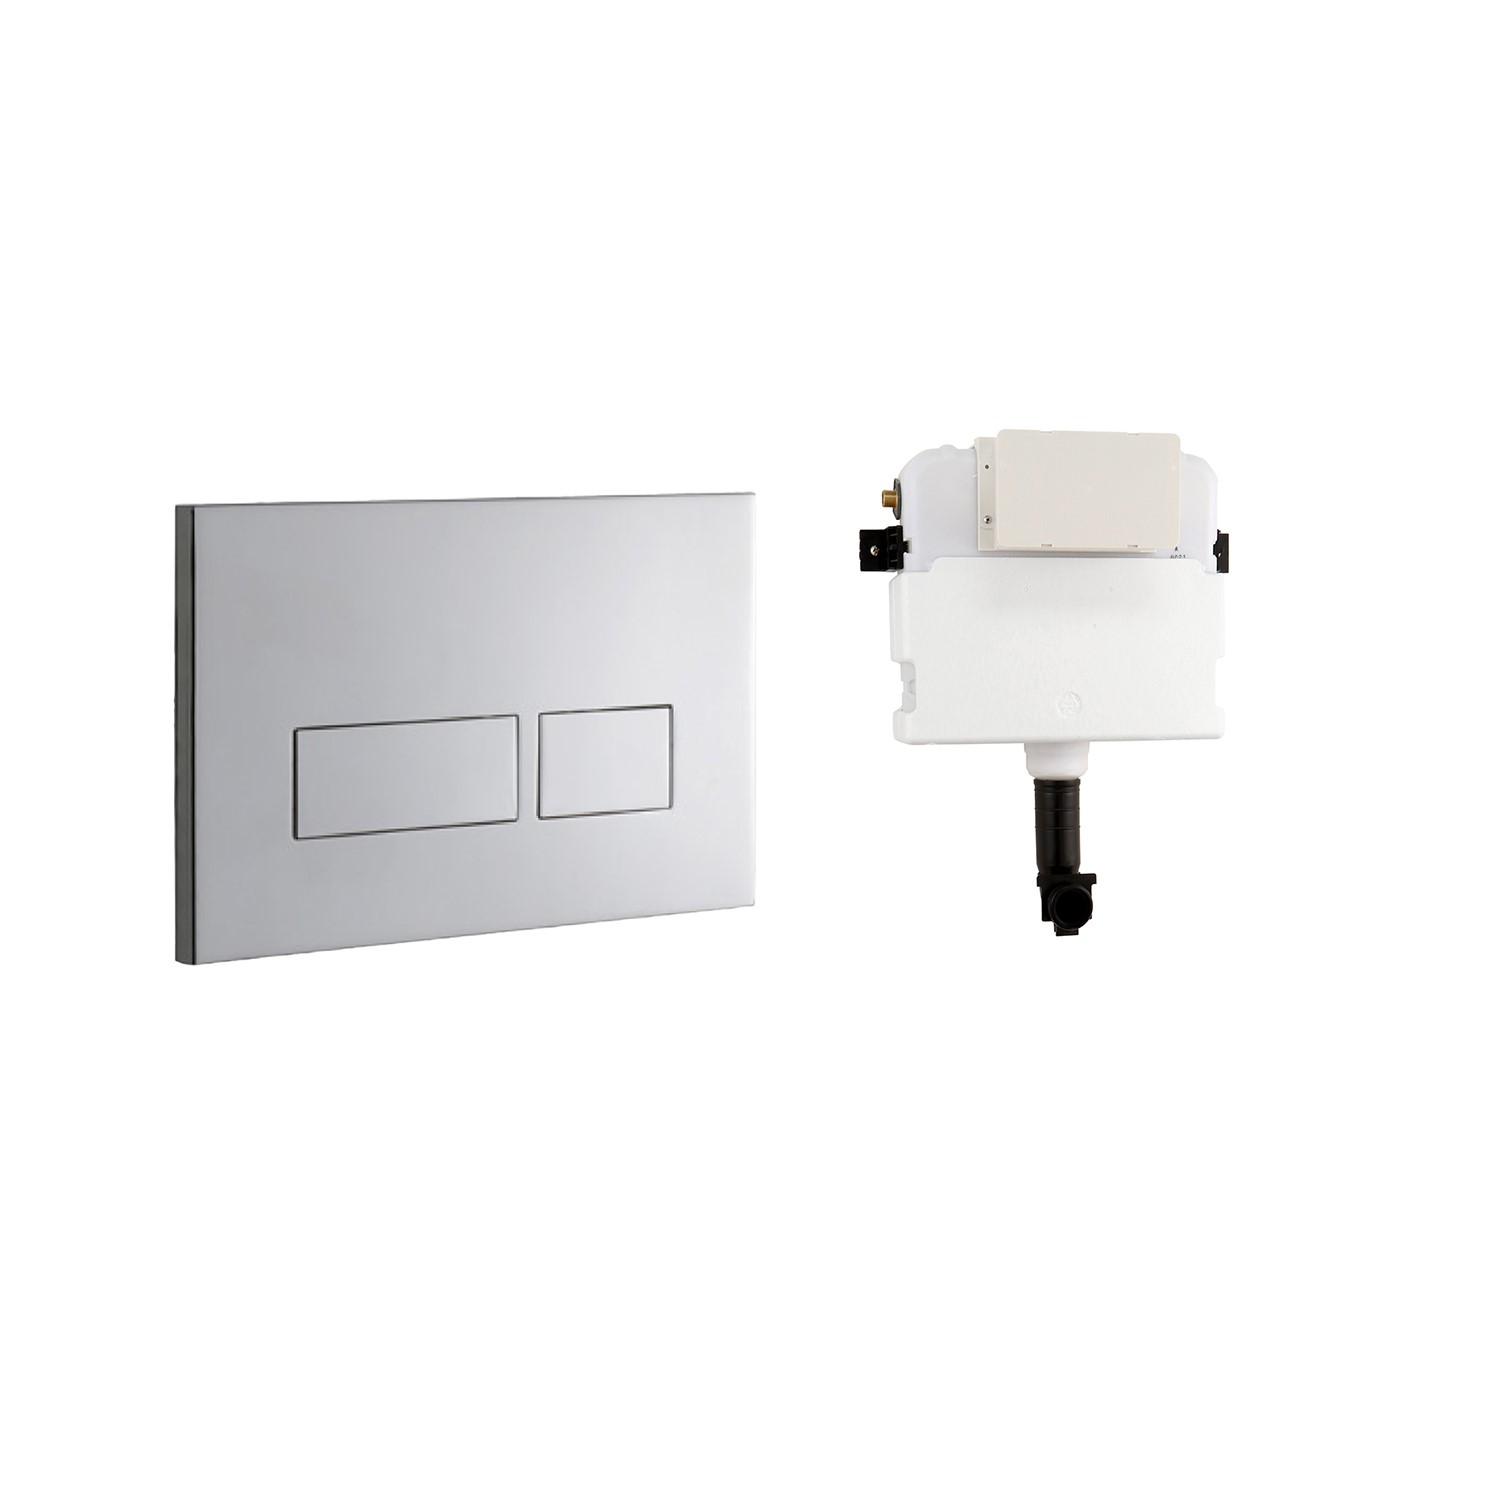 Brushed Nickel Satin Flush Plate with Easi-Plan 980mm Concealed Dual Flush Cistern Only